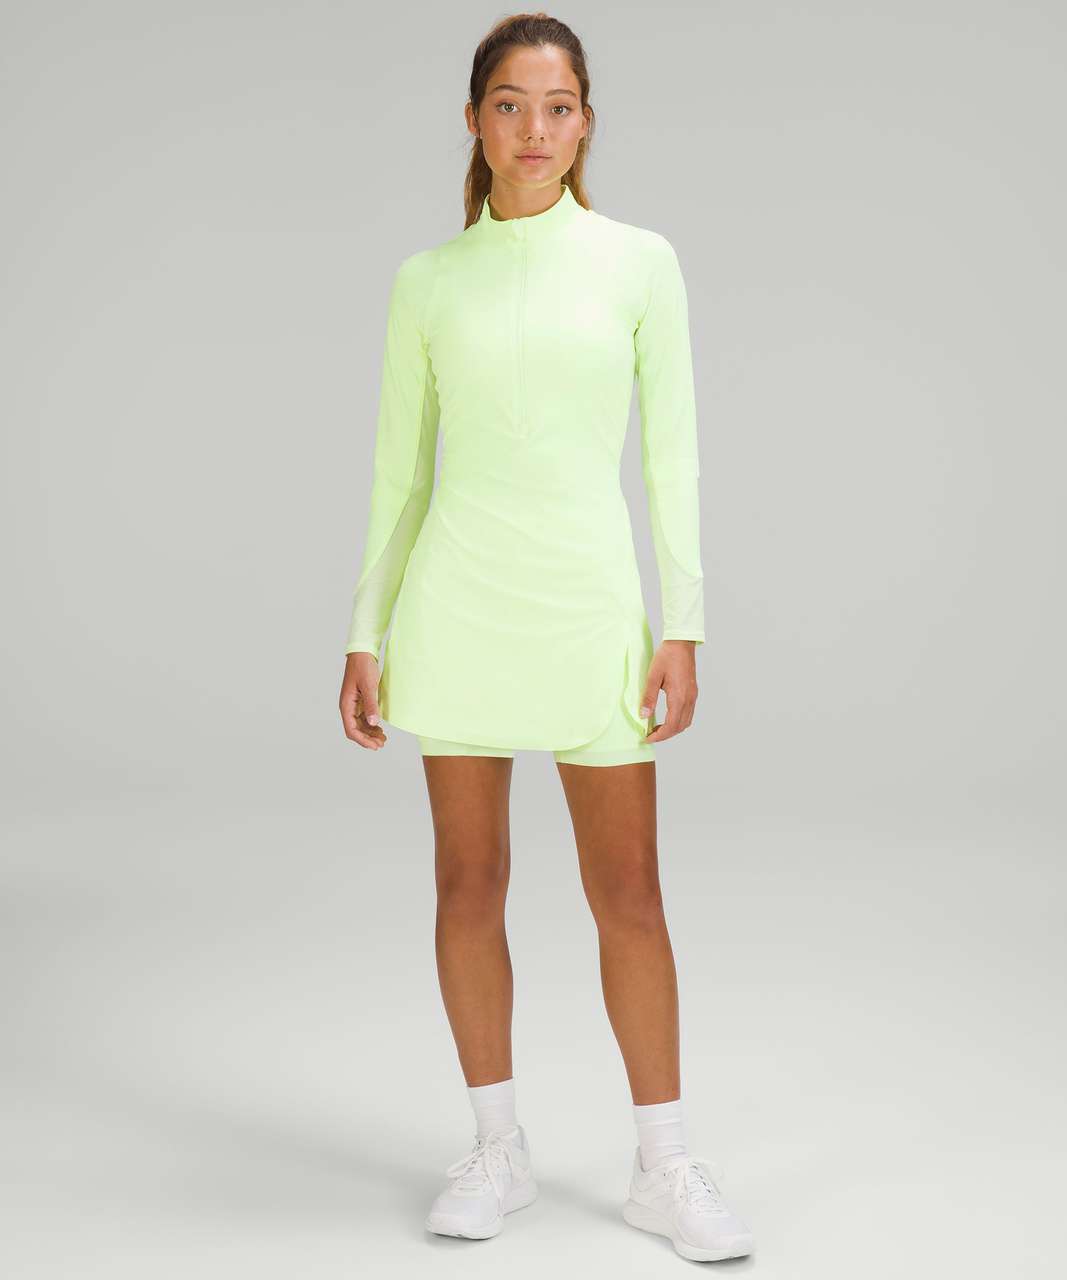 This Lululemon Tennis Dress Is On Sale For 50% Off RN